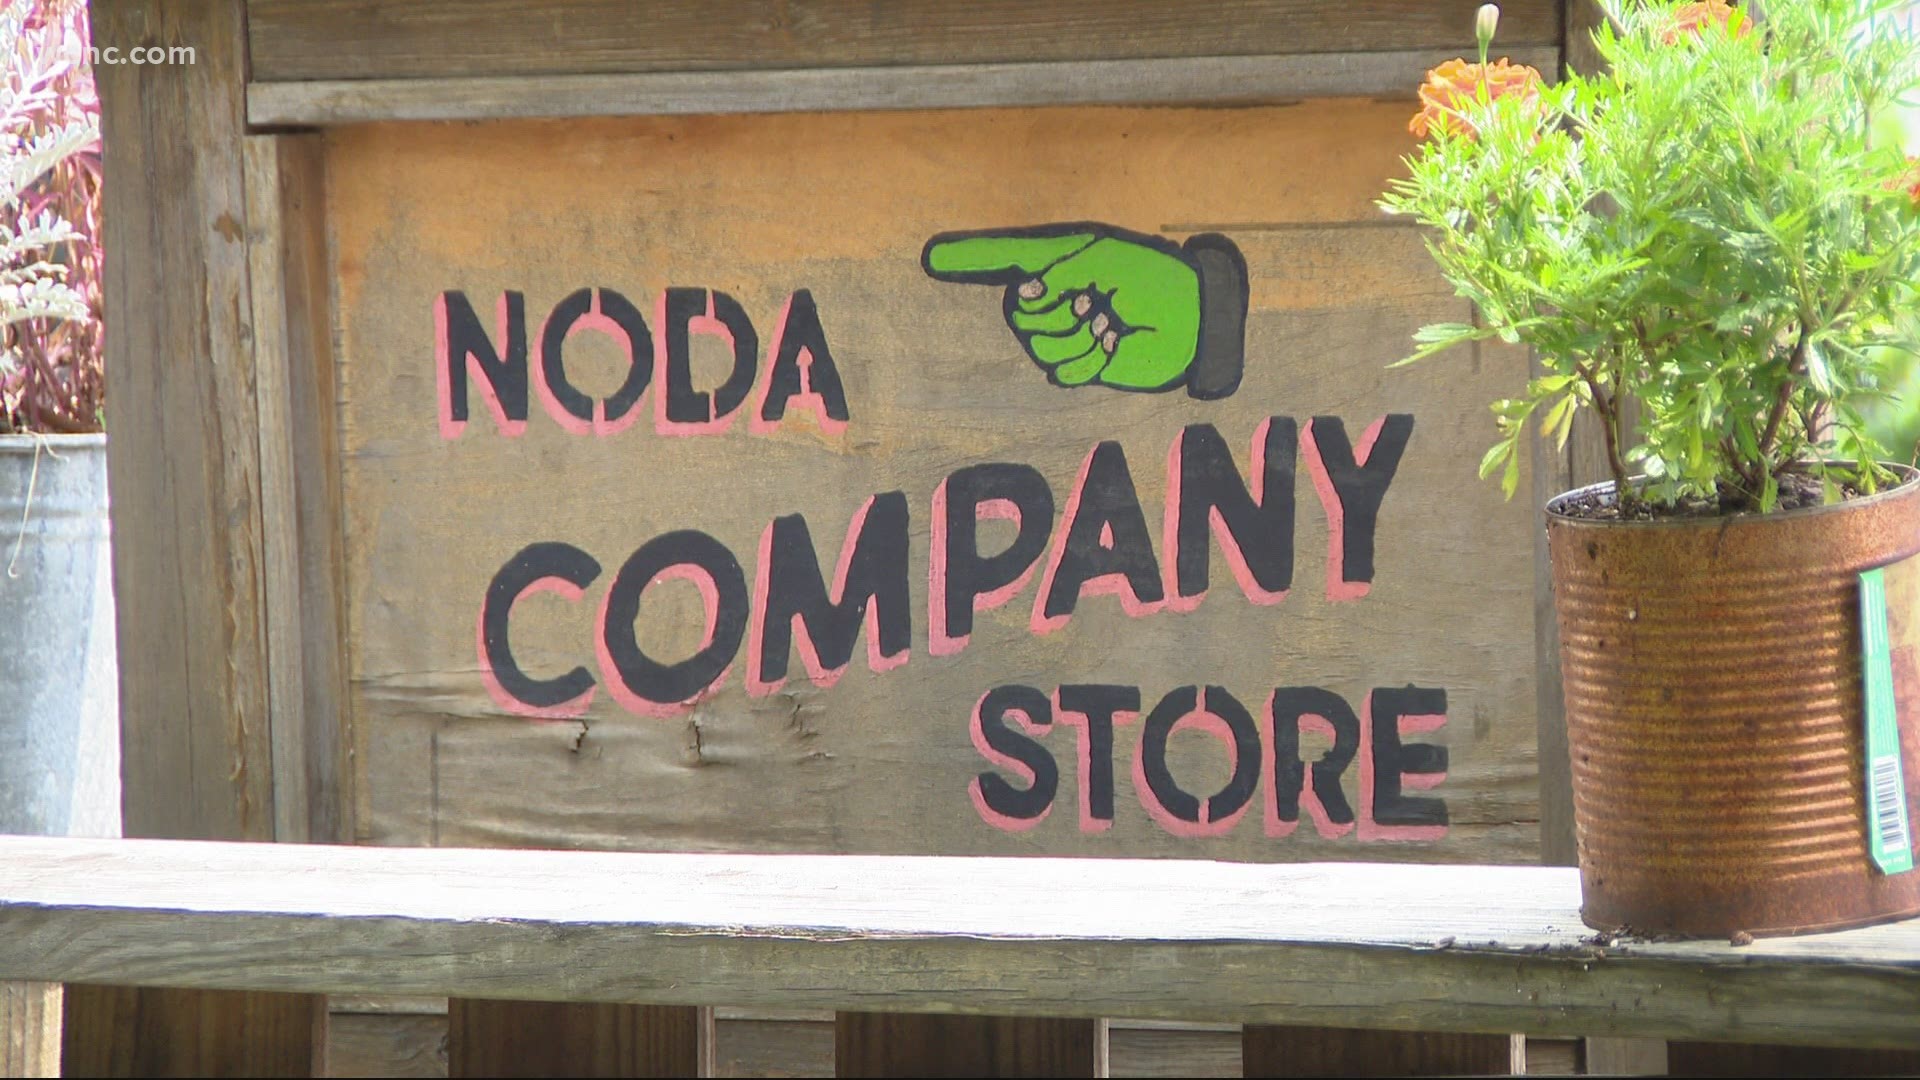 The owners of the NoDa Company Store said they're worried if more people don't get vaccinated, small businesses may have to close down again.